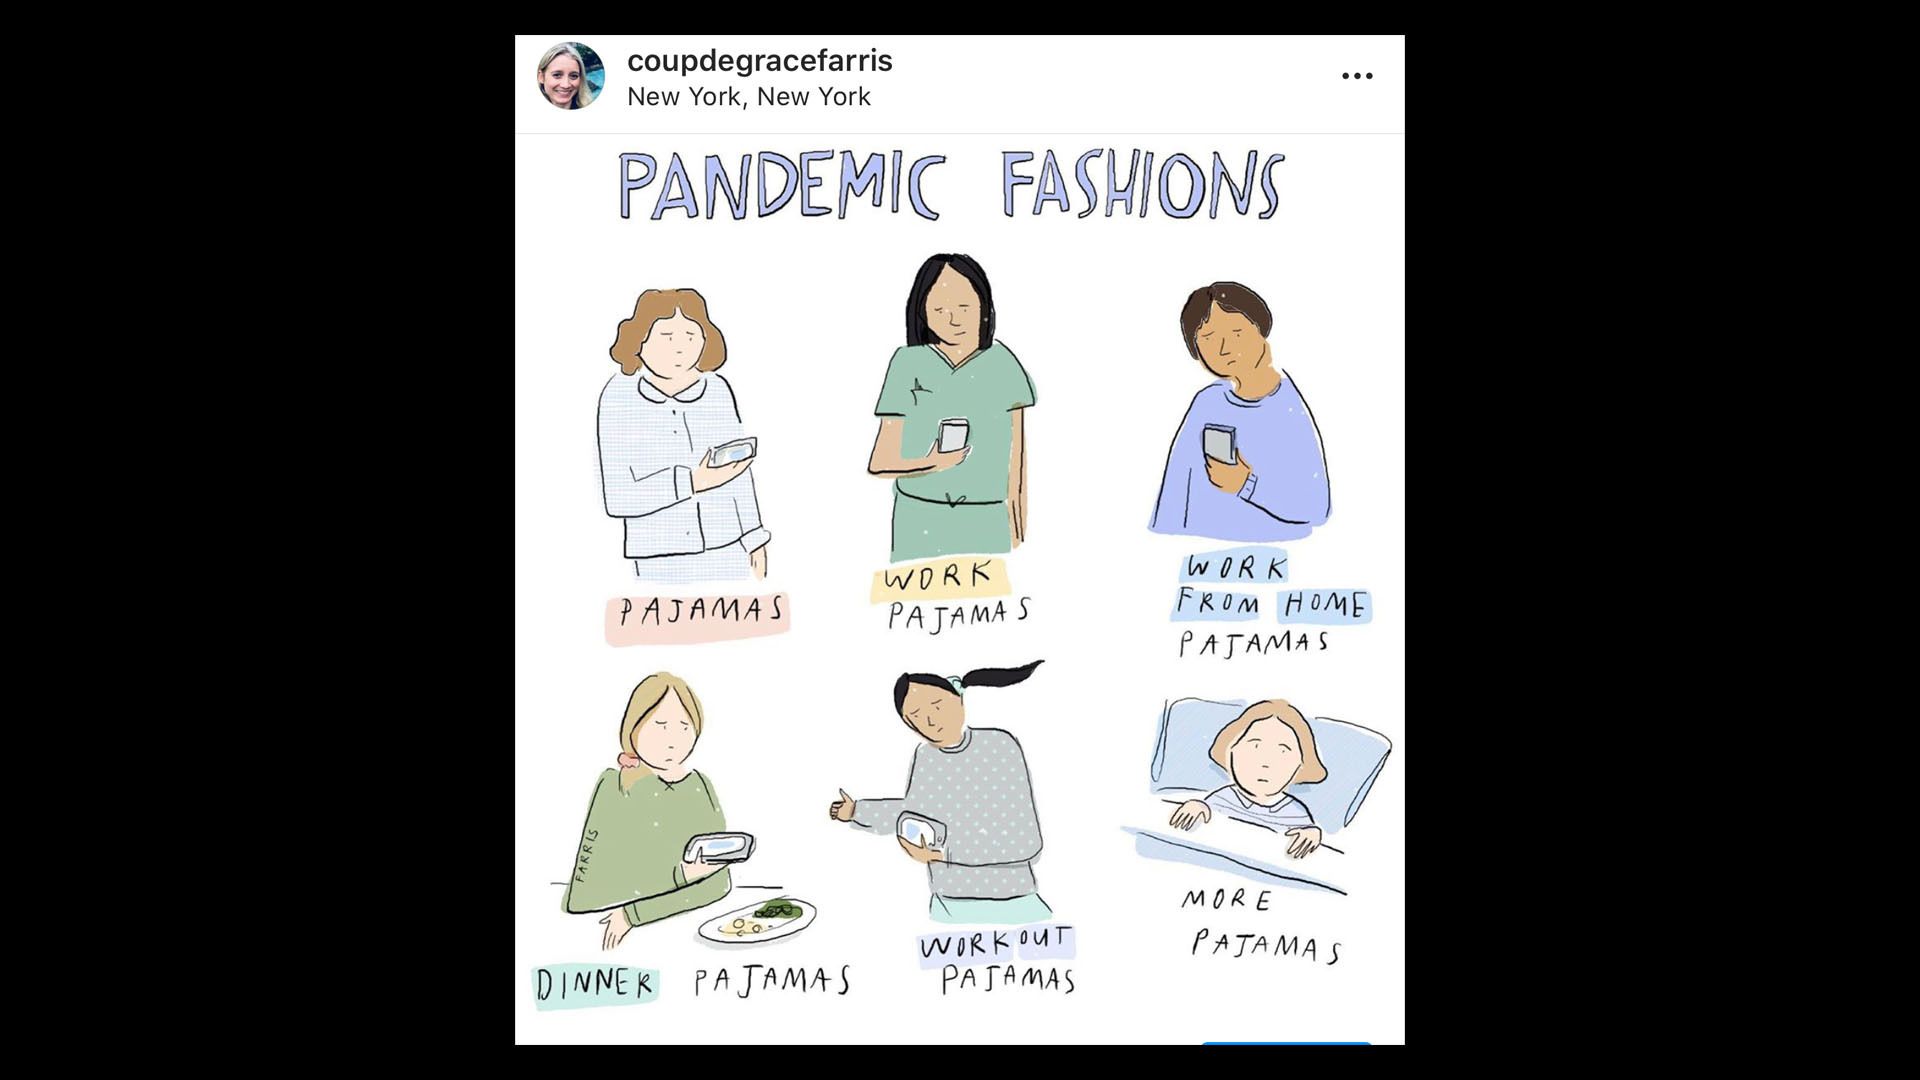 Cartoon by Grace Farris depicting pandemic fashions